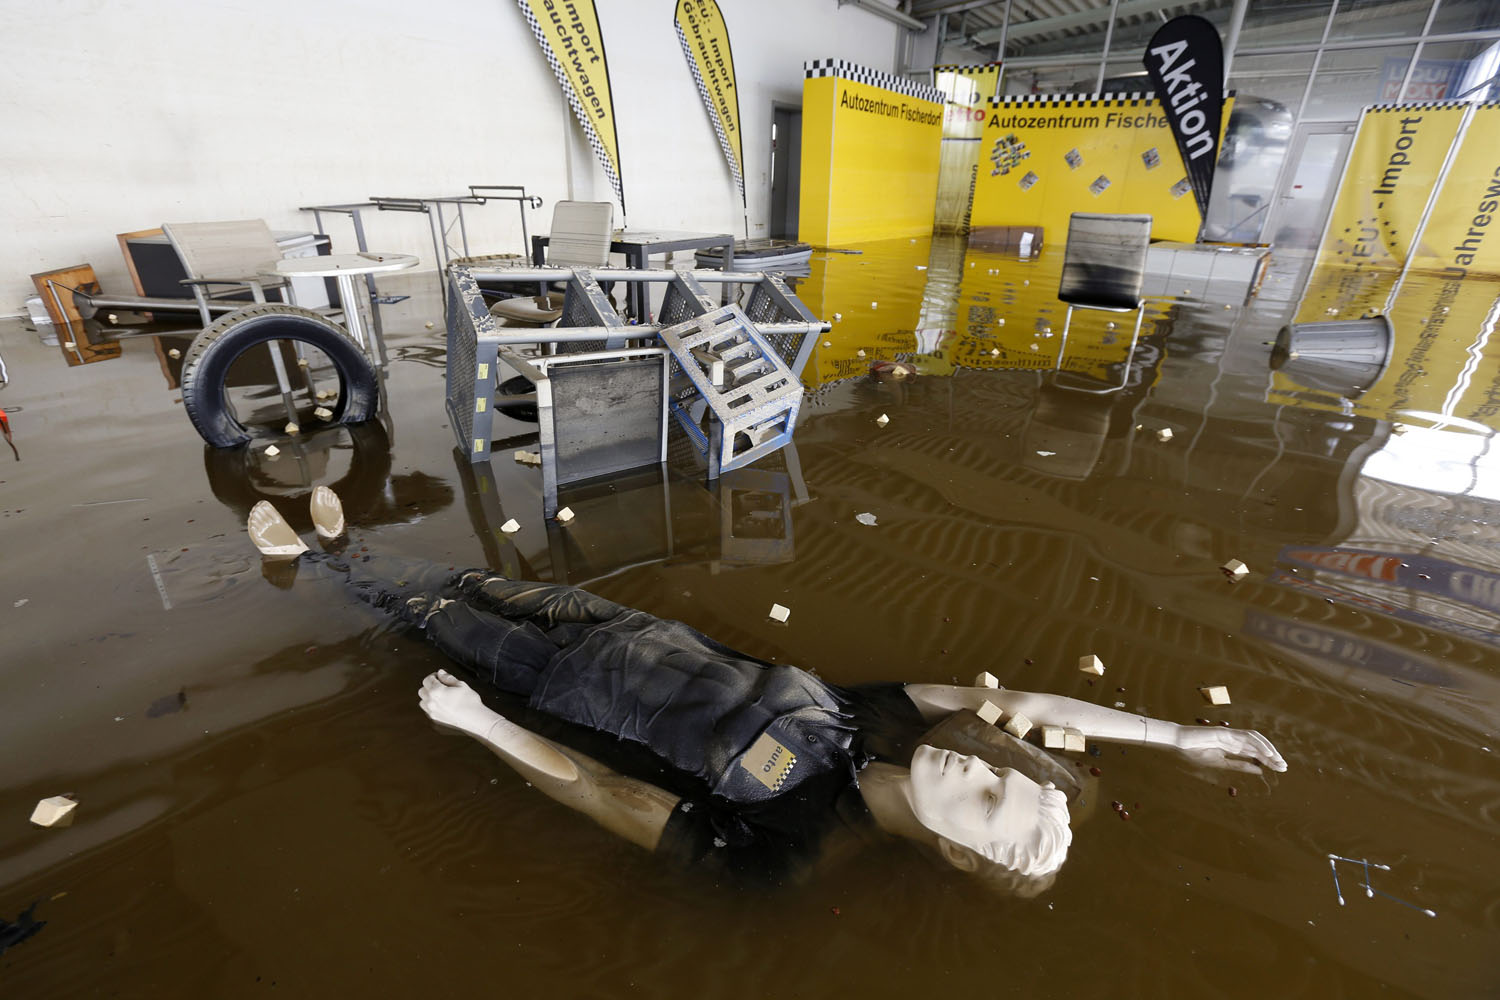 A display dummy floats in a flooded car dealership in Fischerdorf